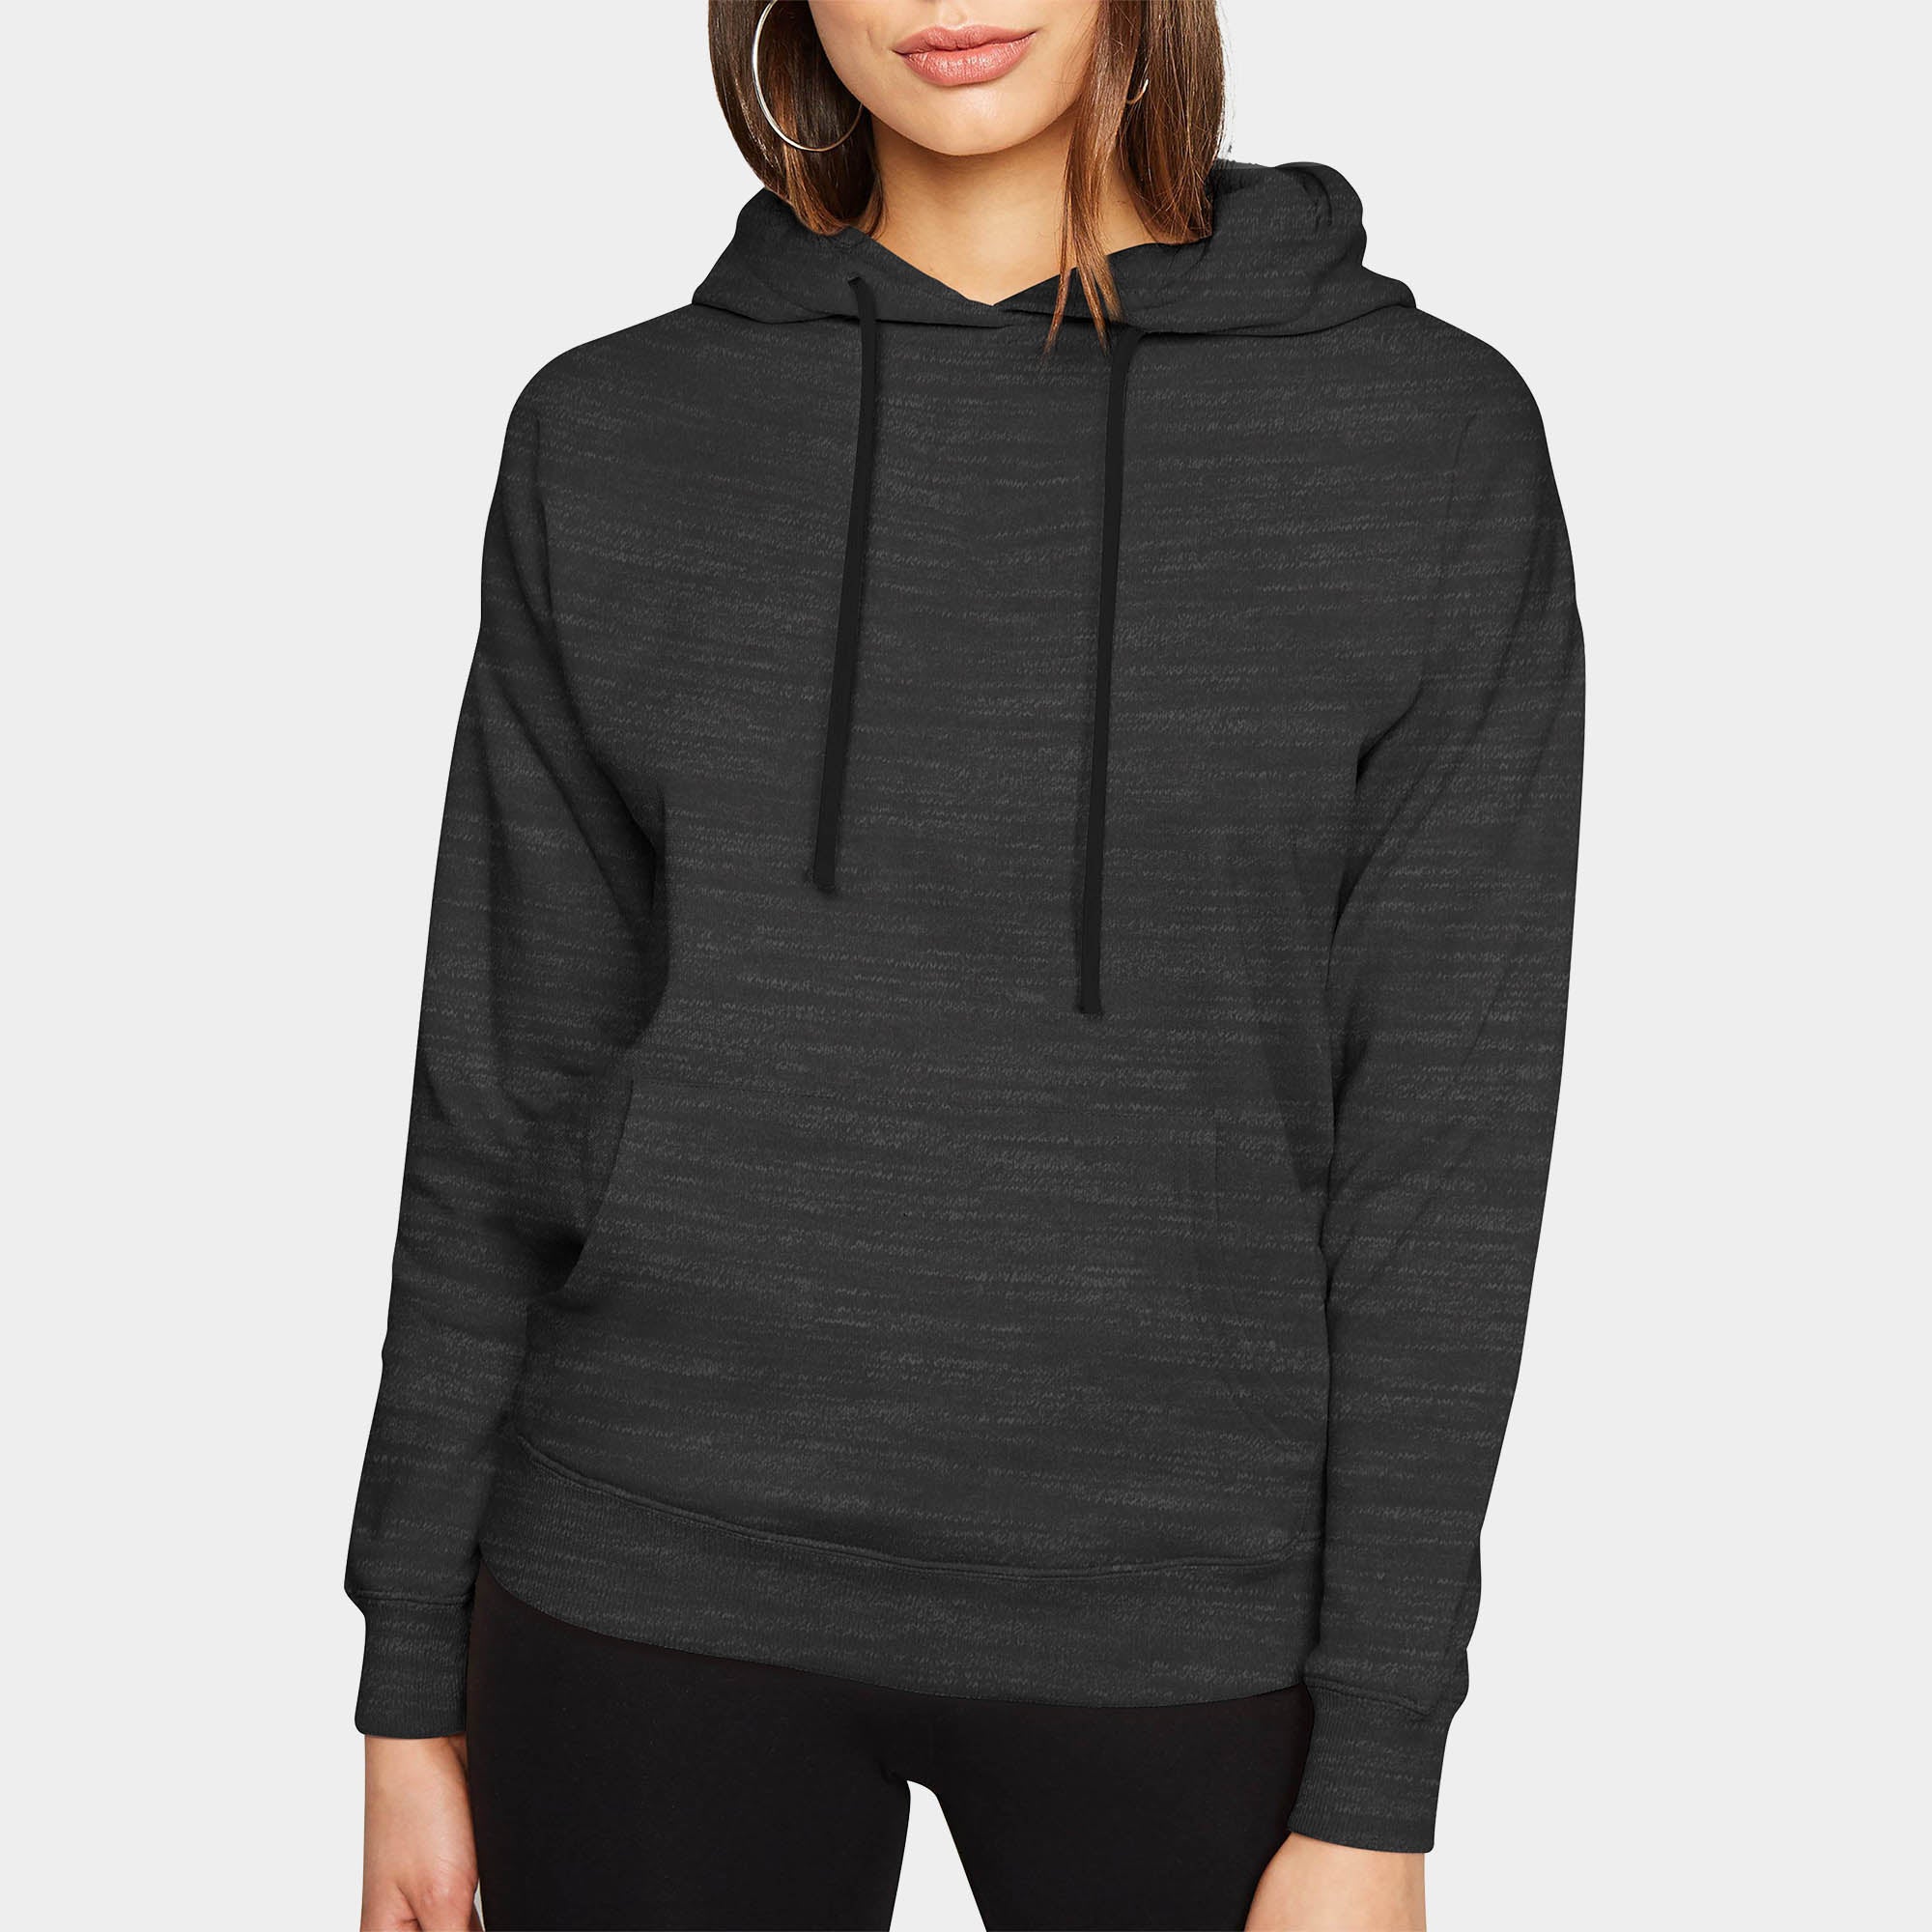 french terry hoodie_french terry sweatshirt_terry hoodie_terry sweatshirt_j crew french terry hoodie_women hoodie_cropped hoodie_sweatshirts for women_Marled Ash